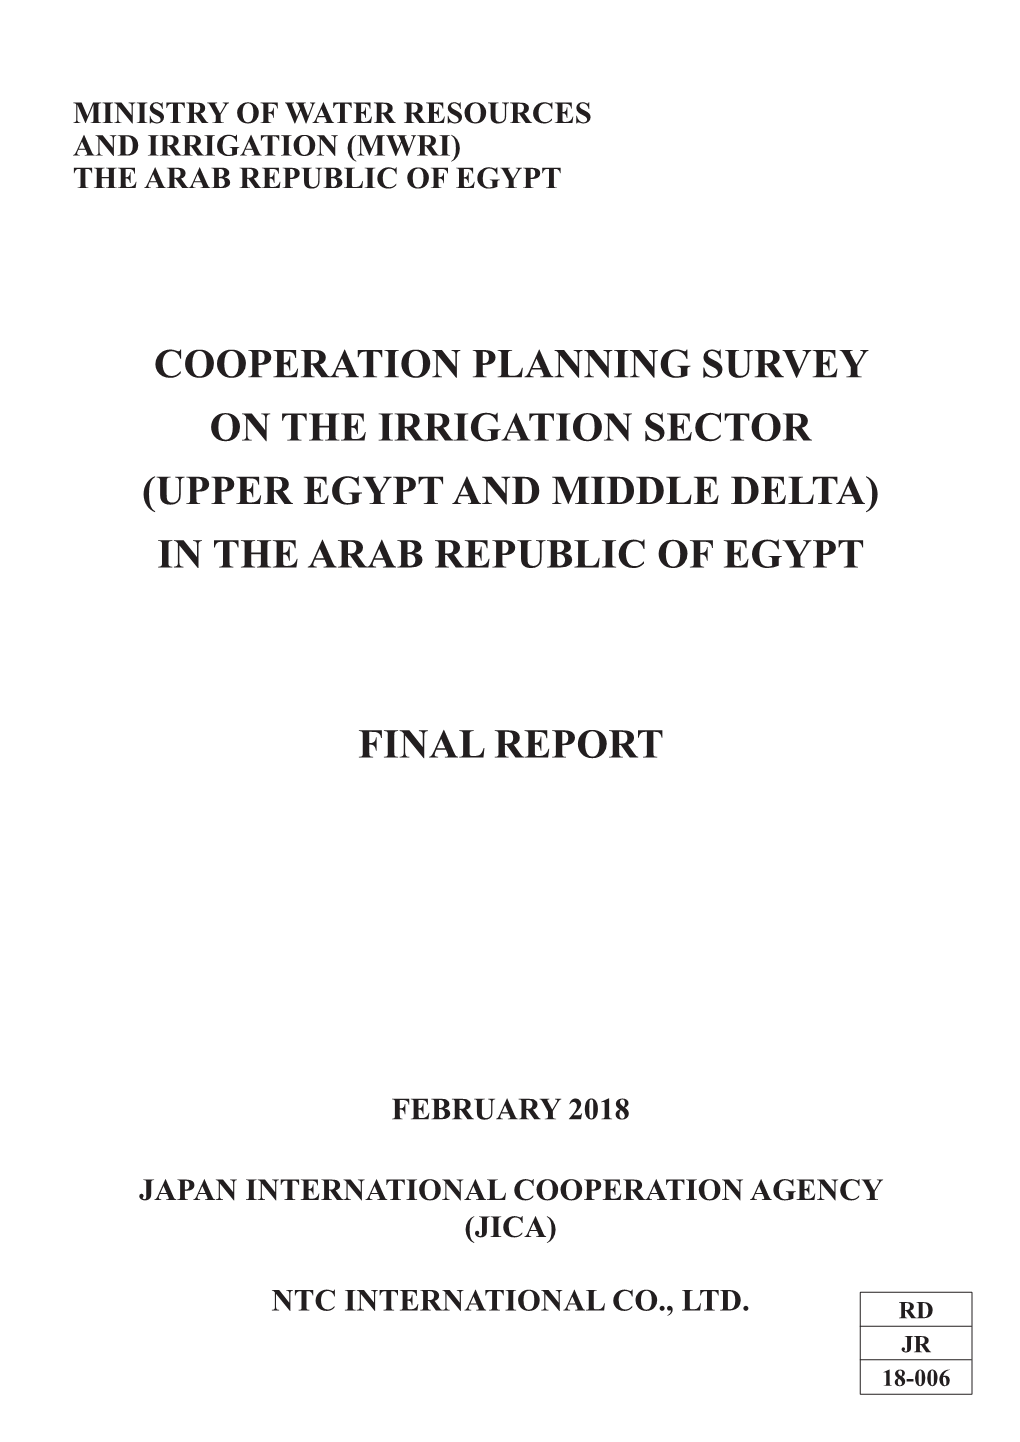 Cooperation Planning Survey on the Irrigation Sector (Upper Egypt and Middle Delta) in the Arab Republic of Egypt Final Report Final Report